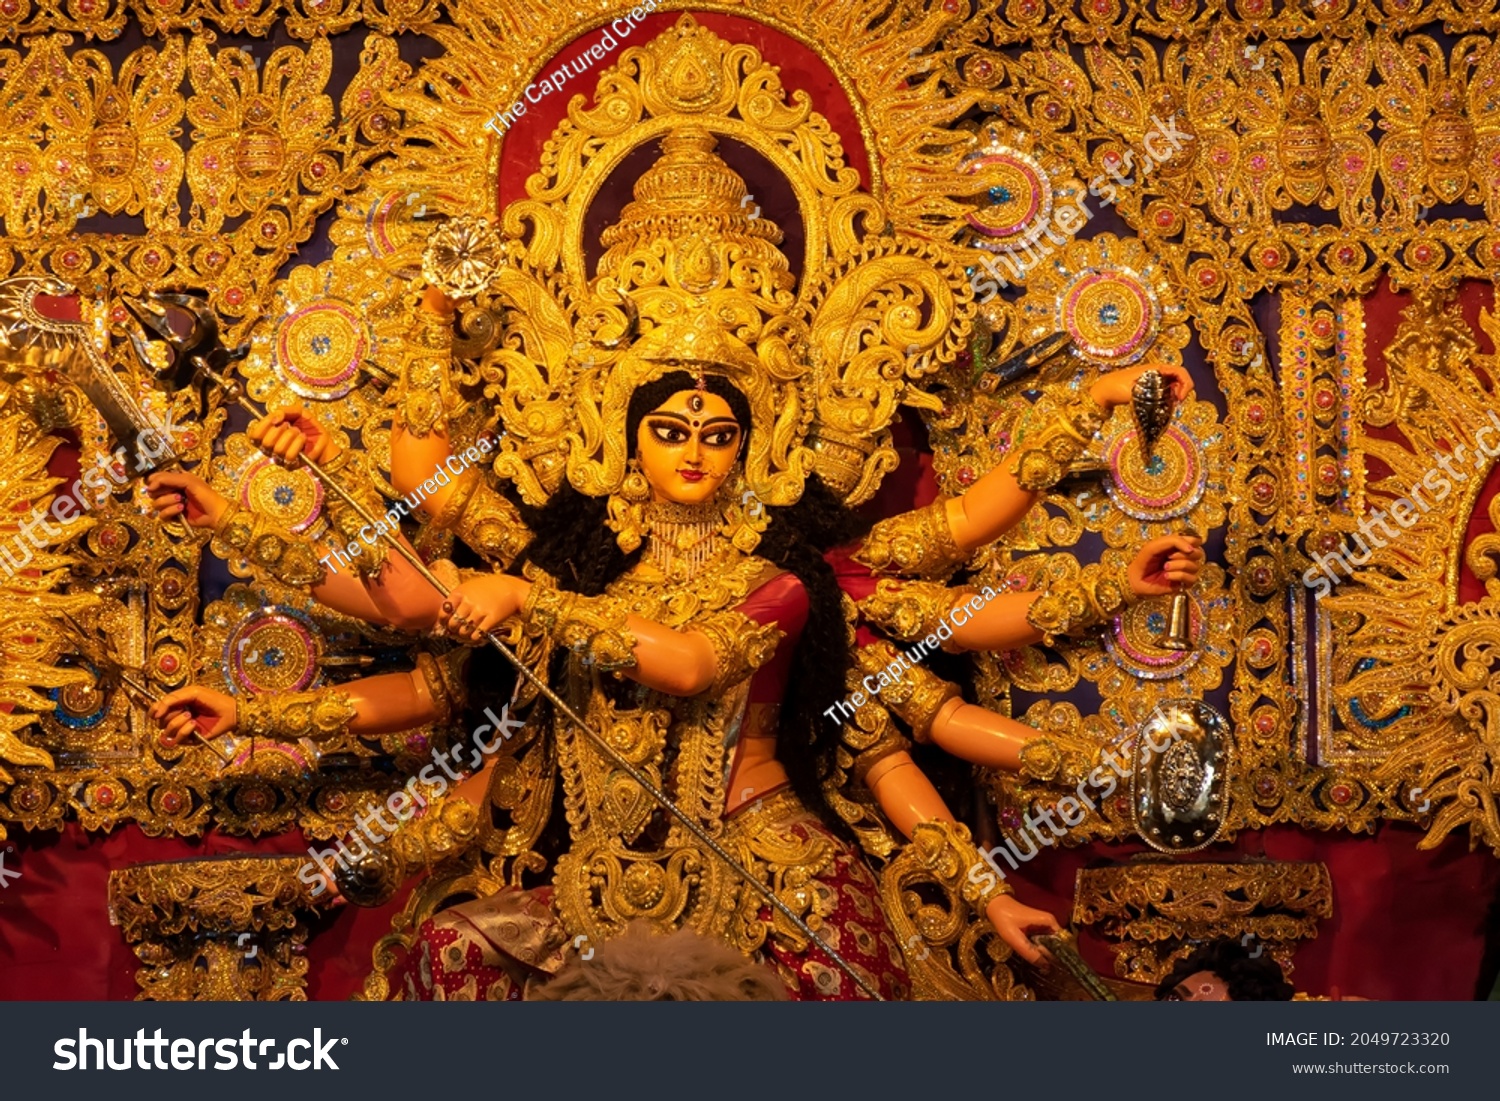 Idol of Goddess Devi Durga at a decorated puja pandal in Kolkata, West Bengal, India. Durga Puja is a famous and major religious festival of Hinduism that is celebrated throughout the world. #2049723320